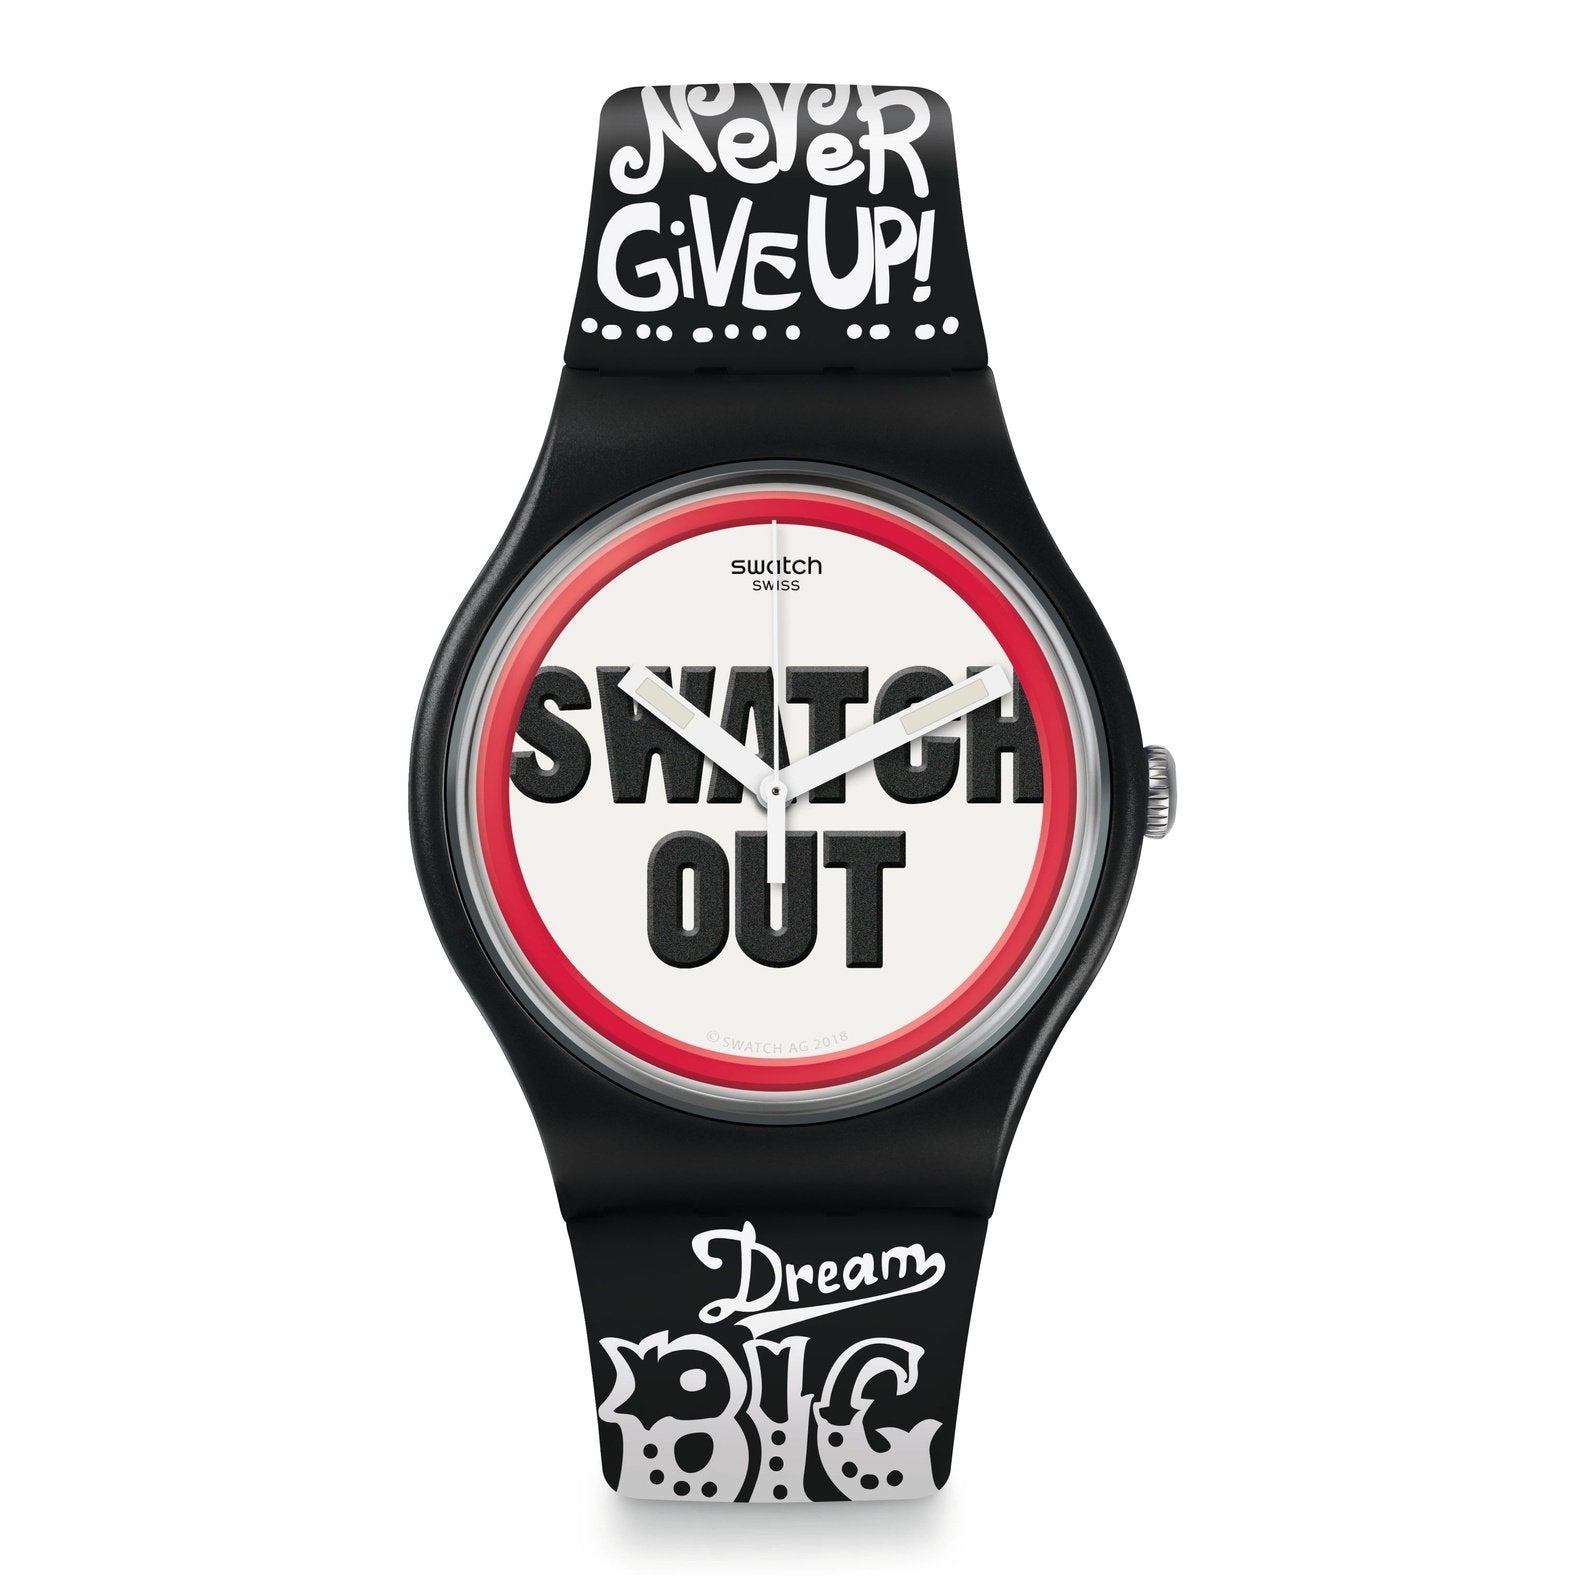 SWATCH OUT Swatch